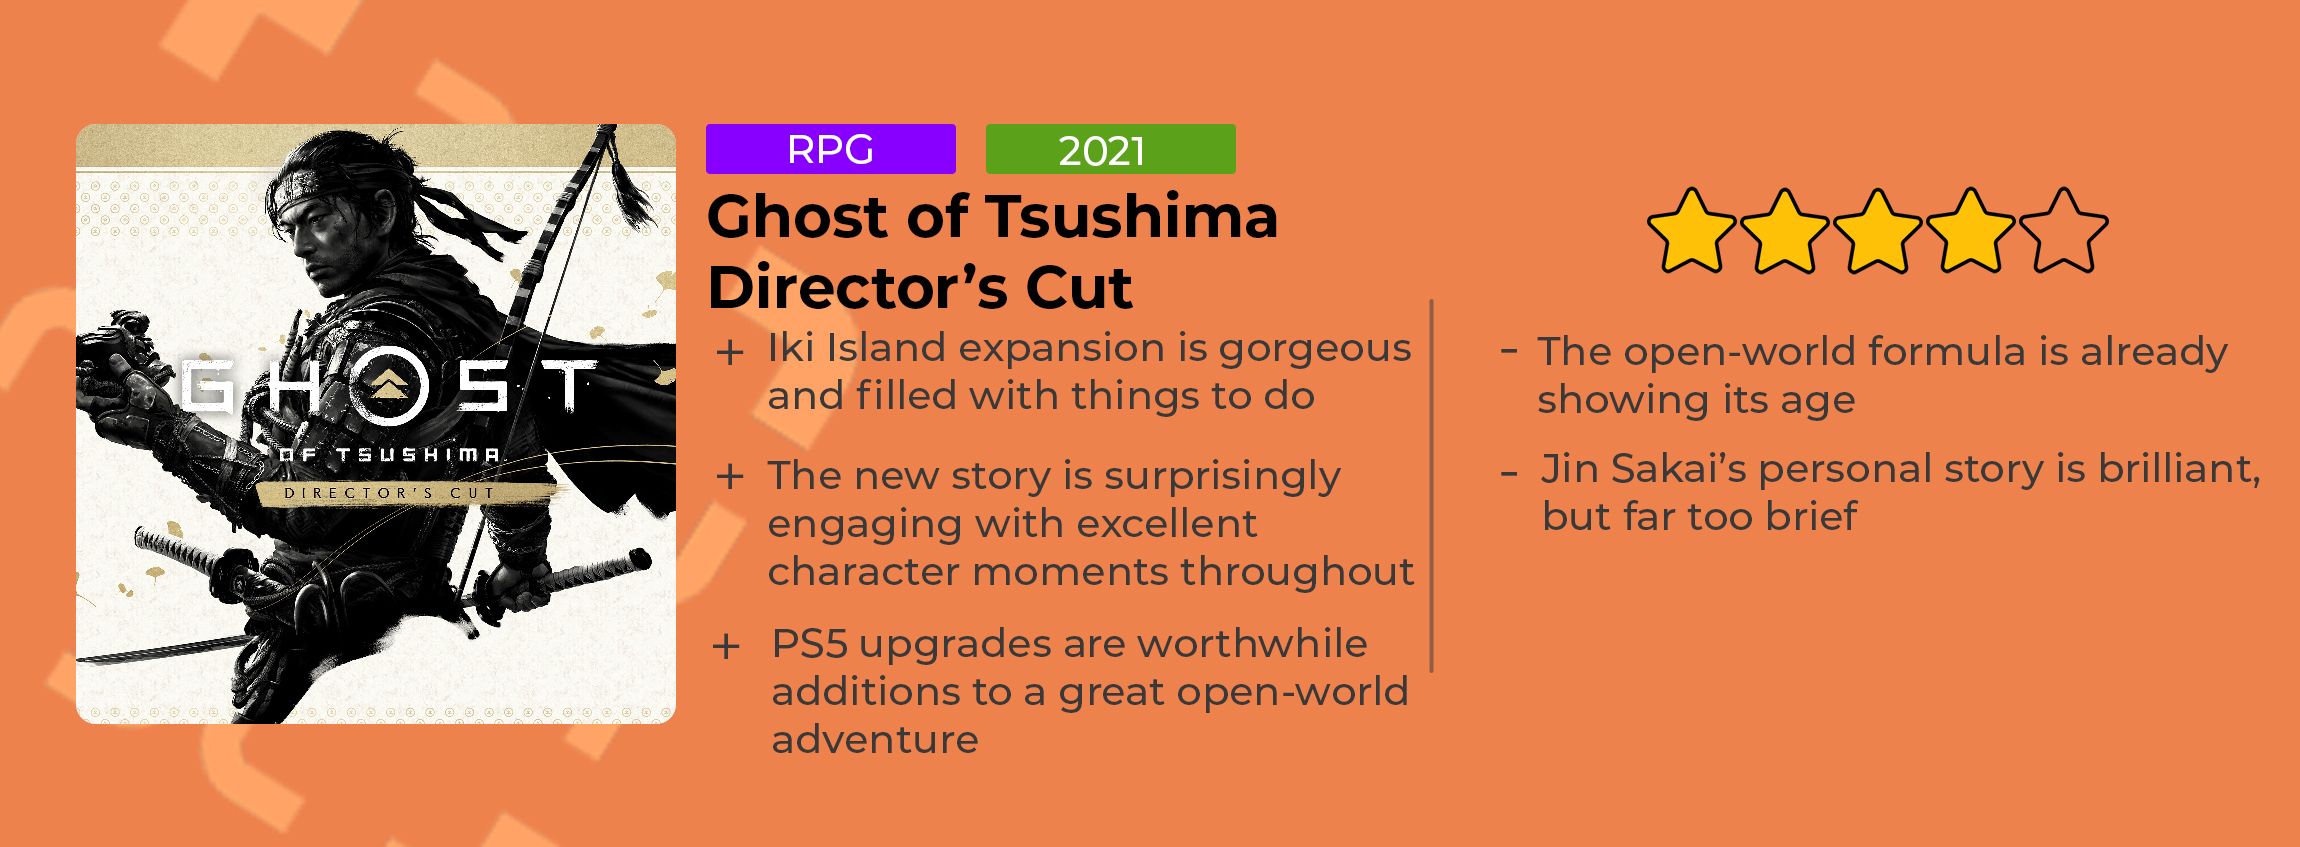 Ghost of Tsushima Directors Cut Review Card